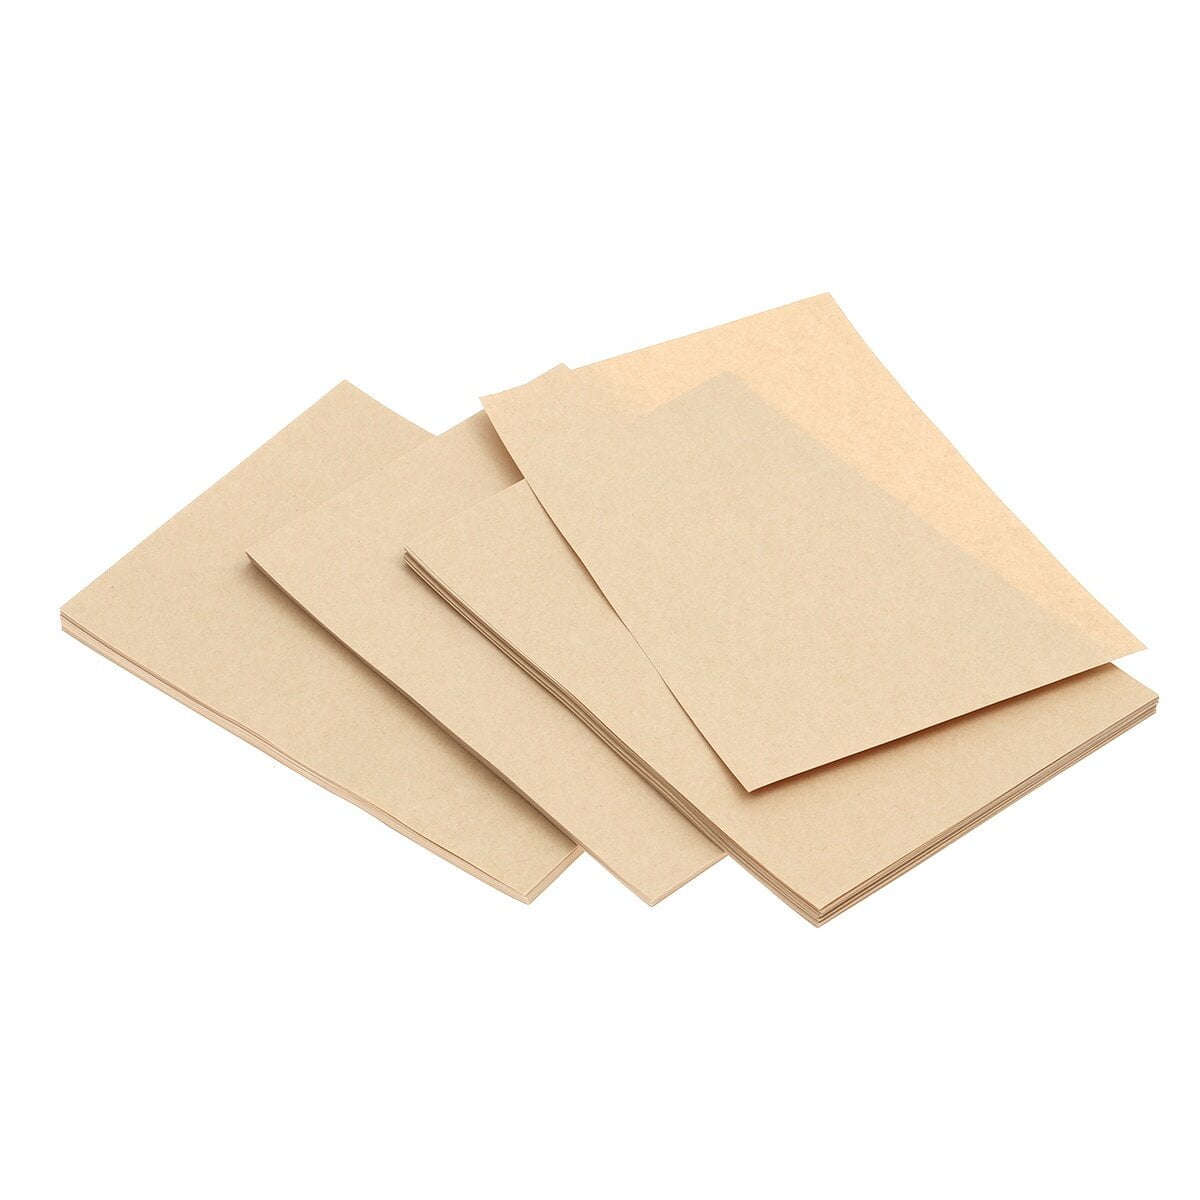 Stationery Writing Paper with Envelopes, 30 Letter Writing Paper+